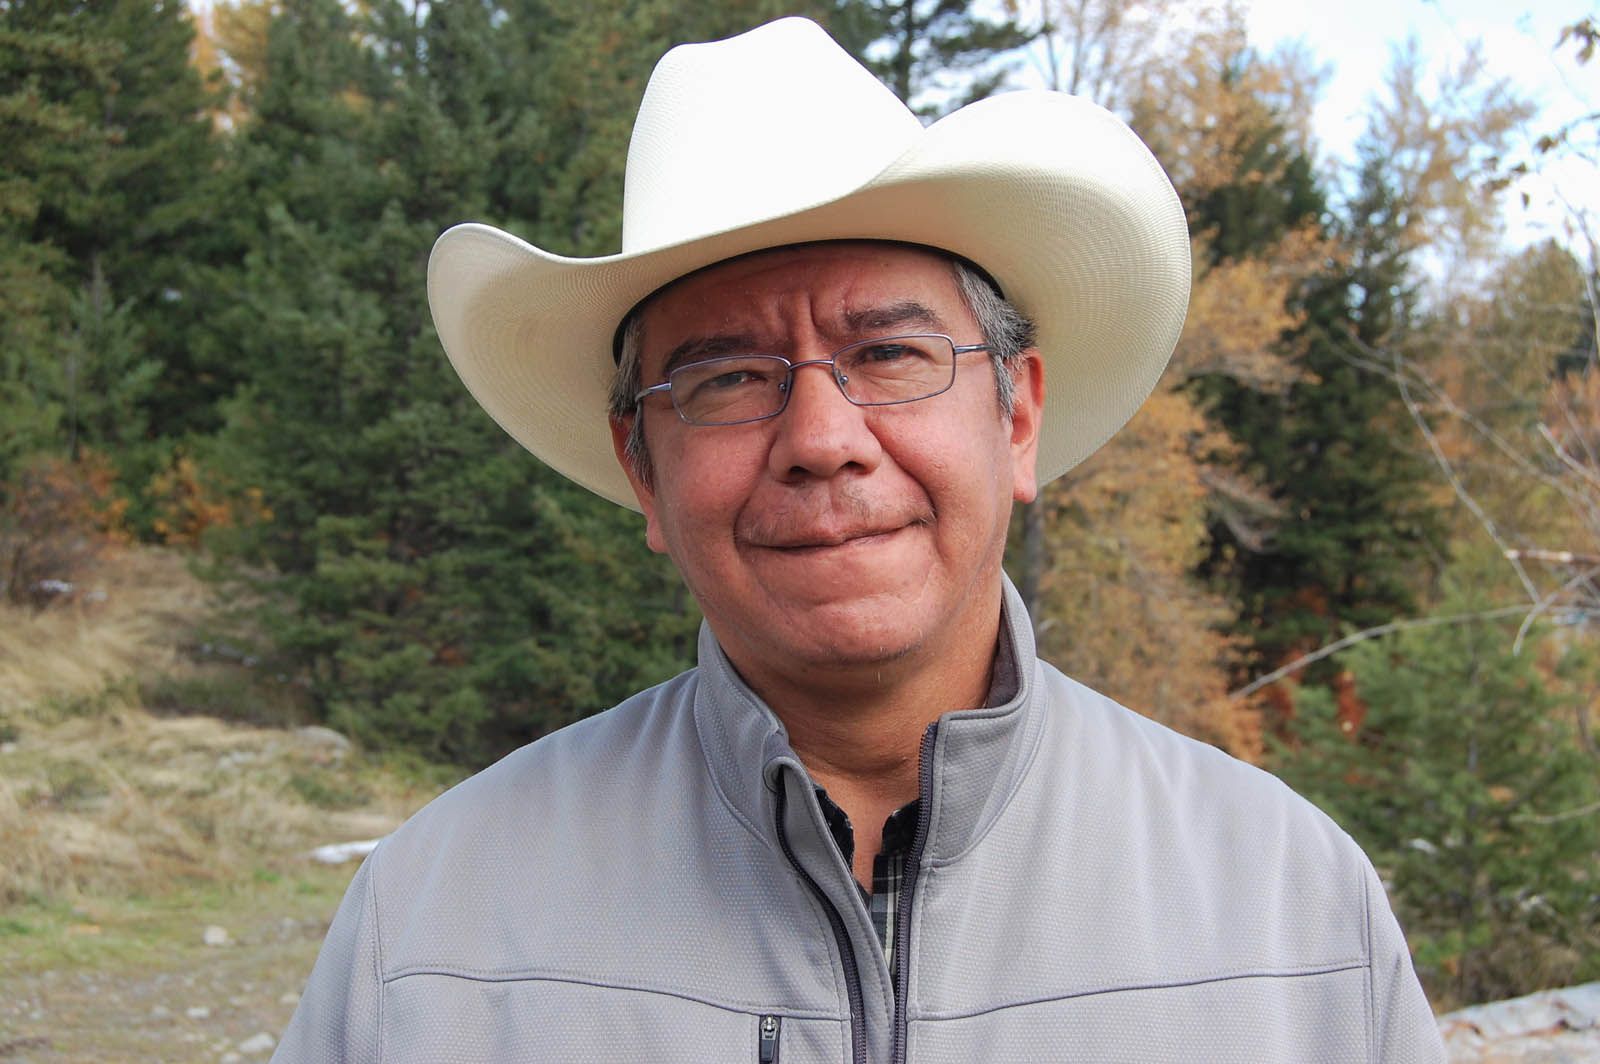 Picture of Chief Lee Spahan. Image courtesy of Jillian Kestler-D’Amours and Megan O’Toole/ Al Jazeera. Canada, 2019.